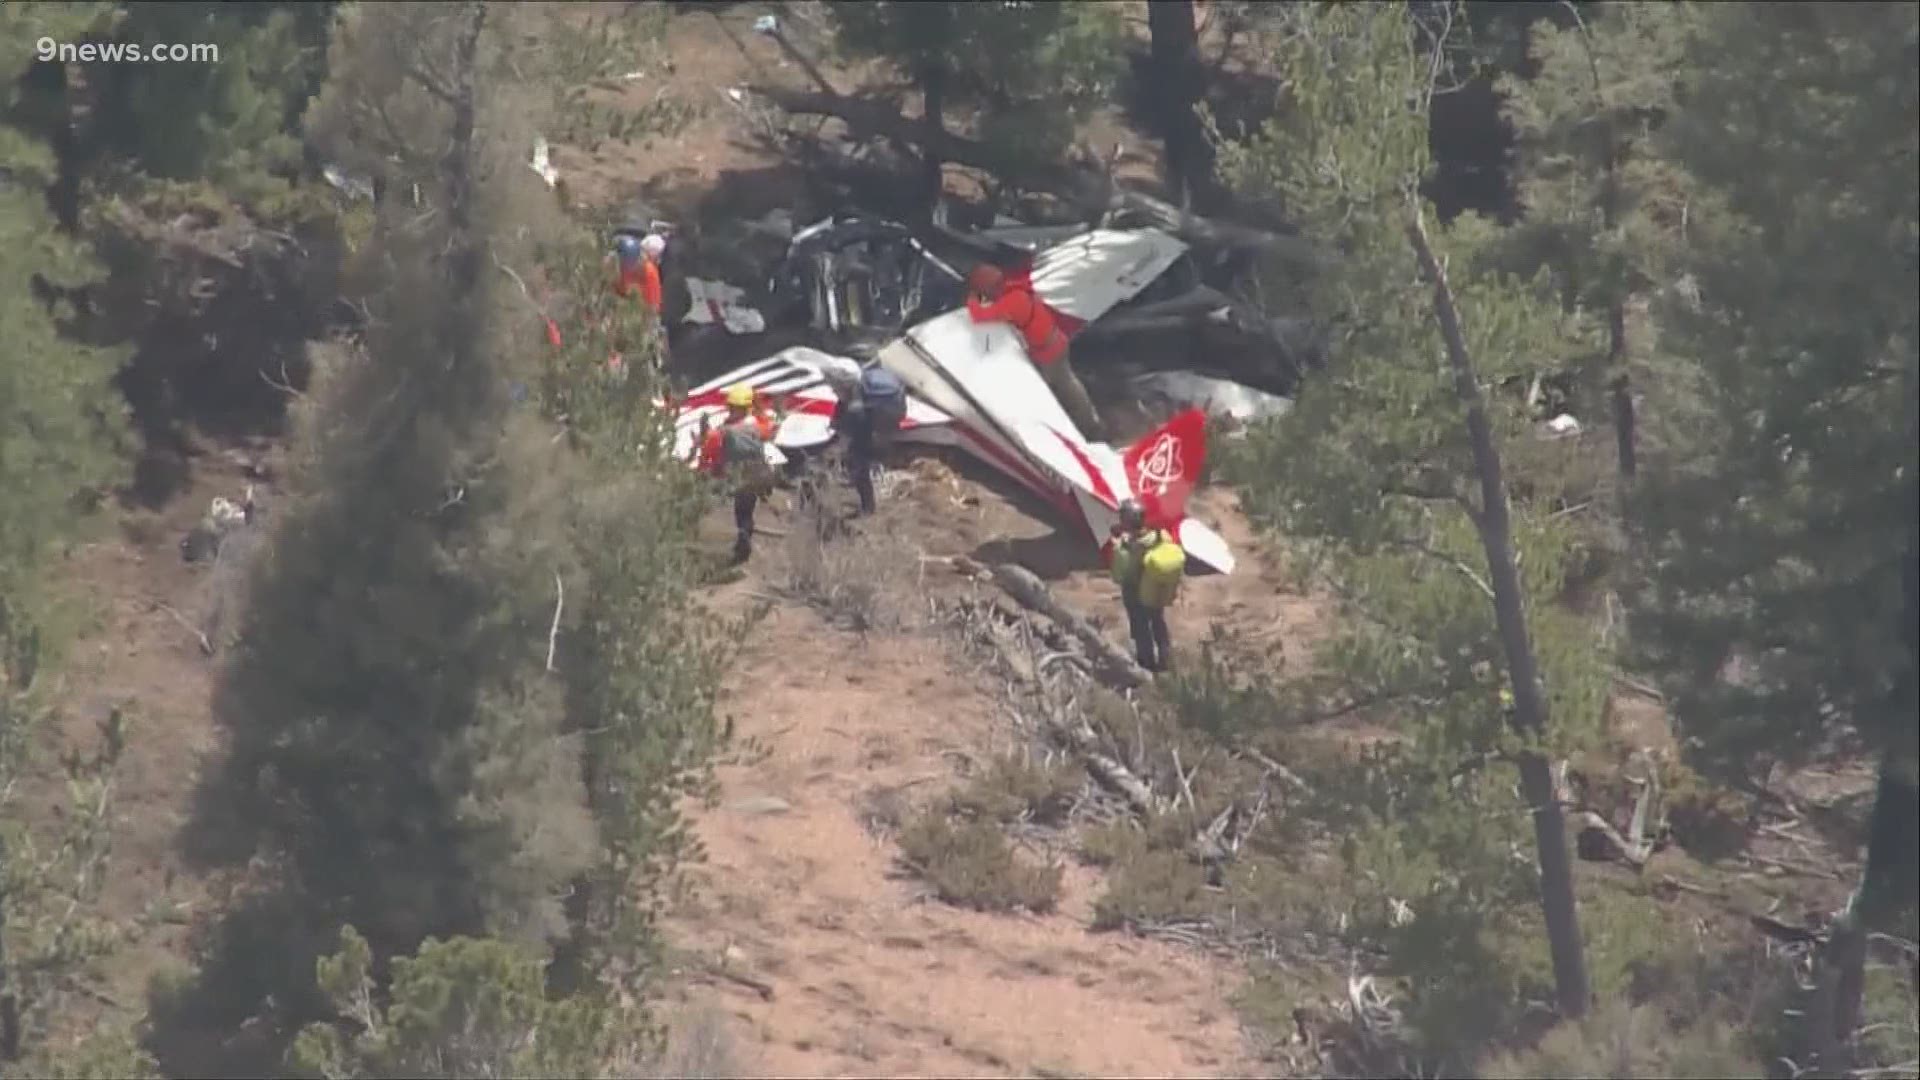 Reports of a plane crash came in Saturday night. Crews located the aircraft Sunday morning.